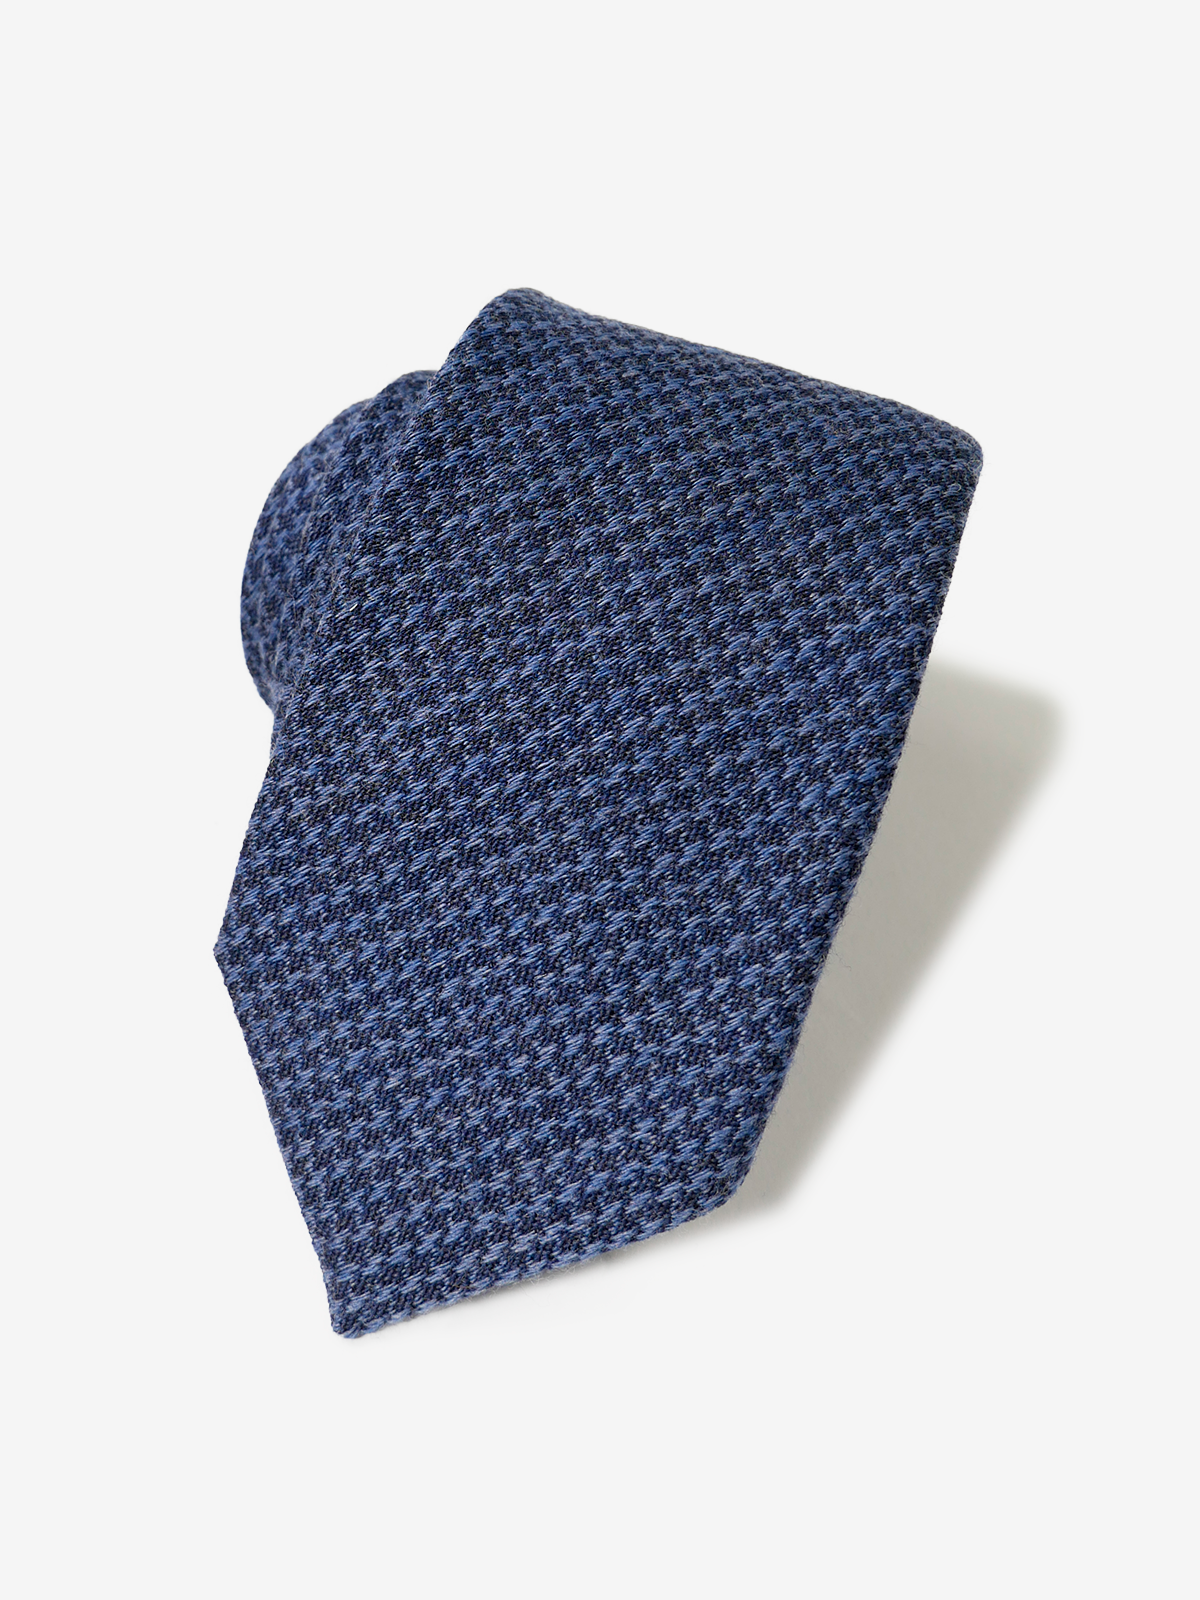 FRANCO BASSI｜Houndstooth Wool Tie｜ブルー